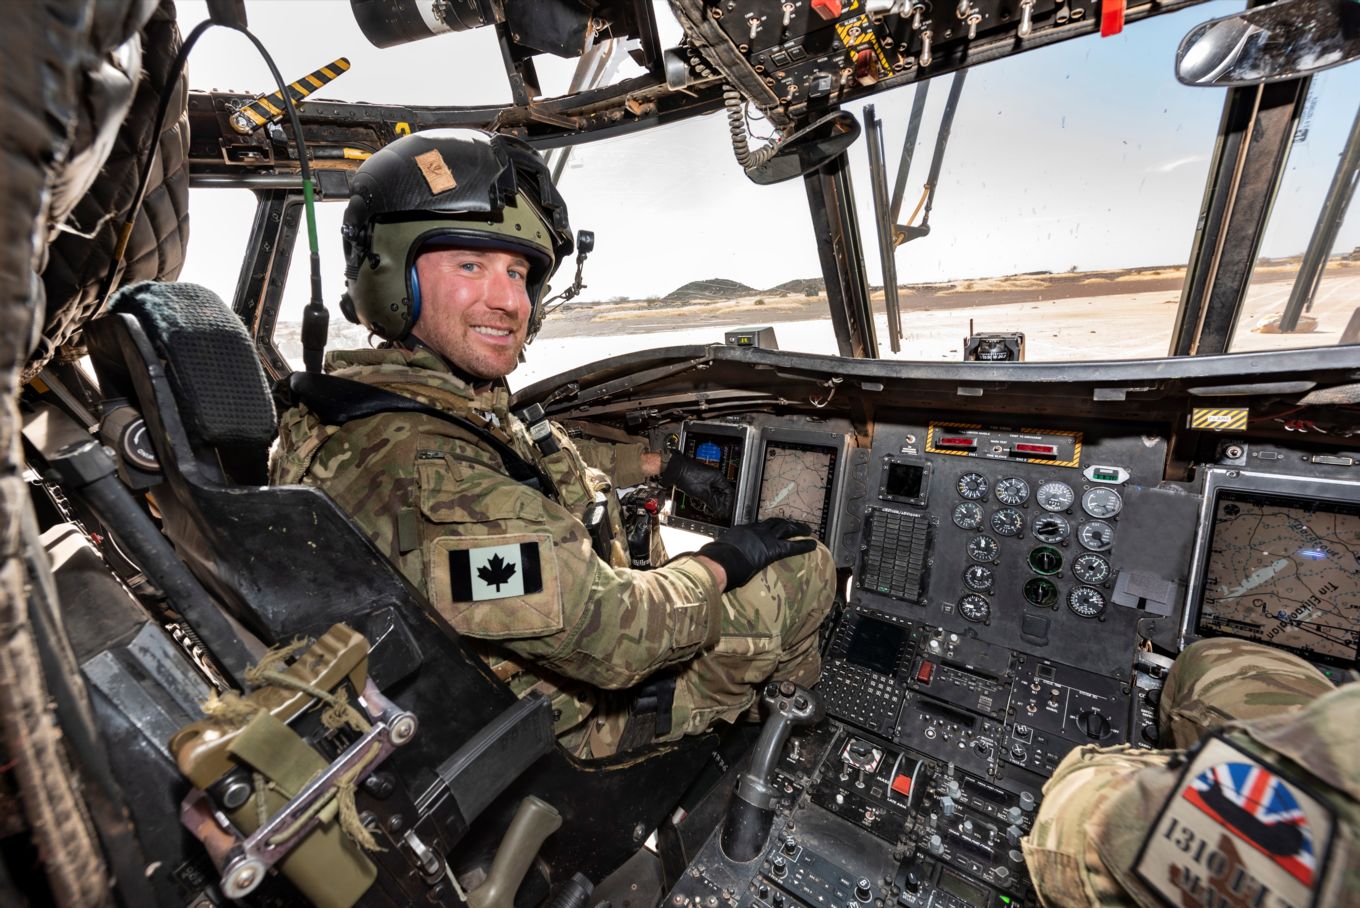 Image shows Captain Stewart in the cockpit of a Chinook helicopter.